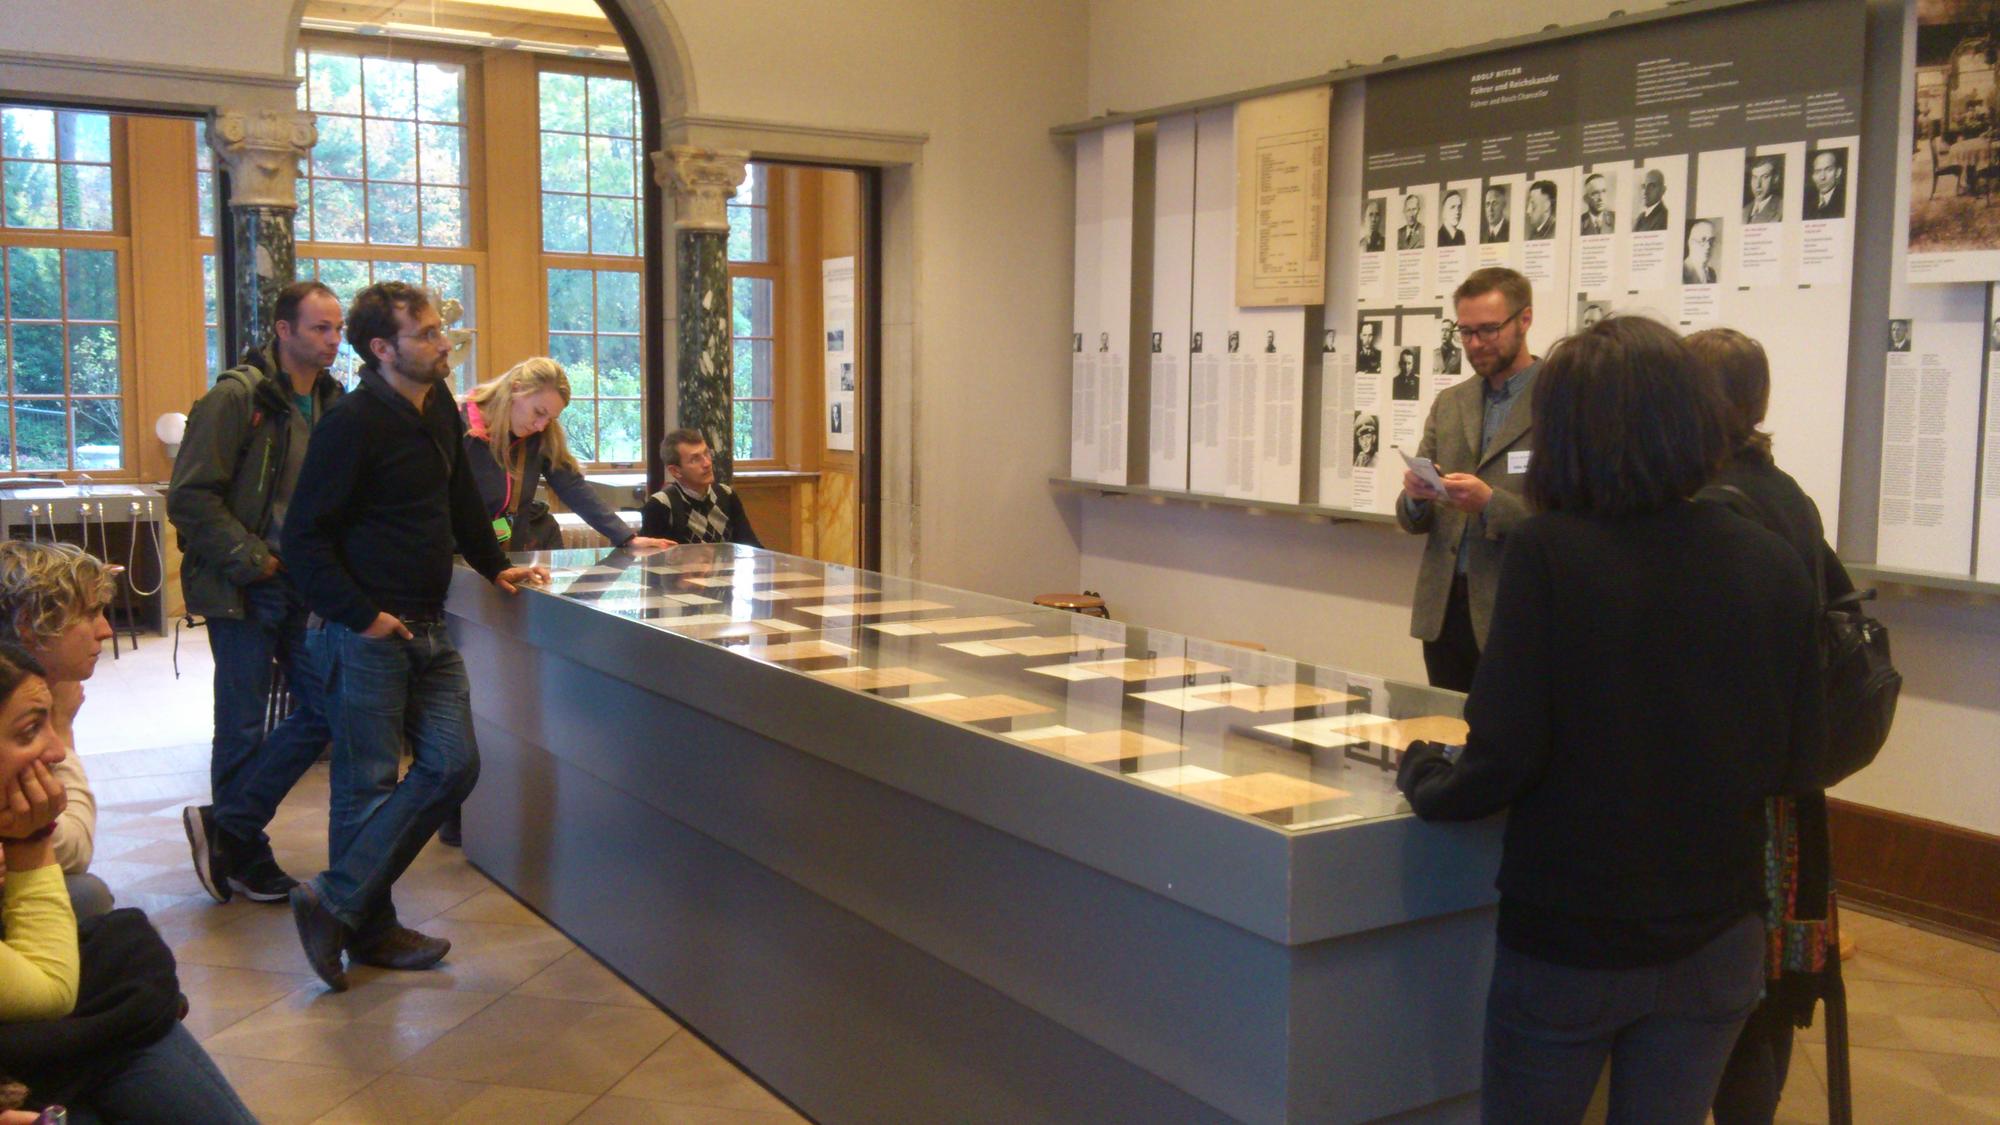 October 29, 2014 - House of the Wannsee Conference